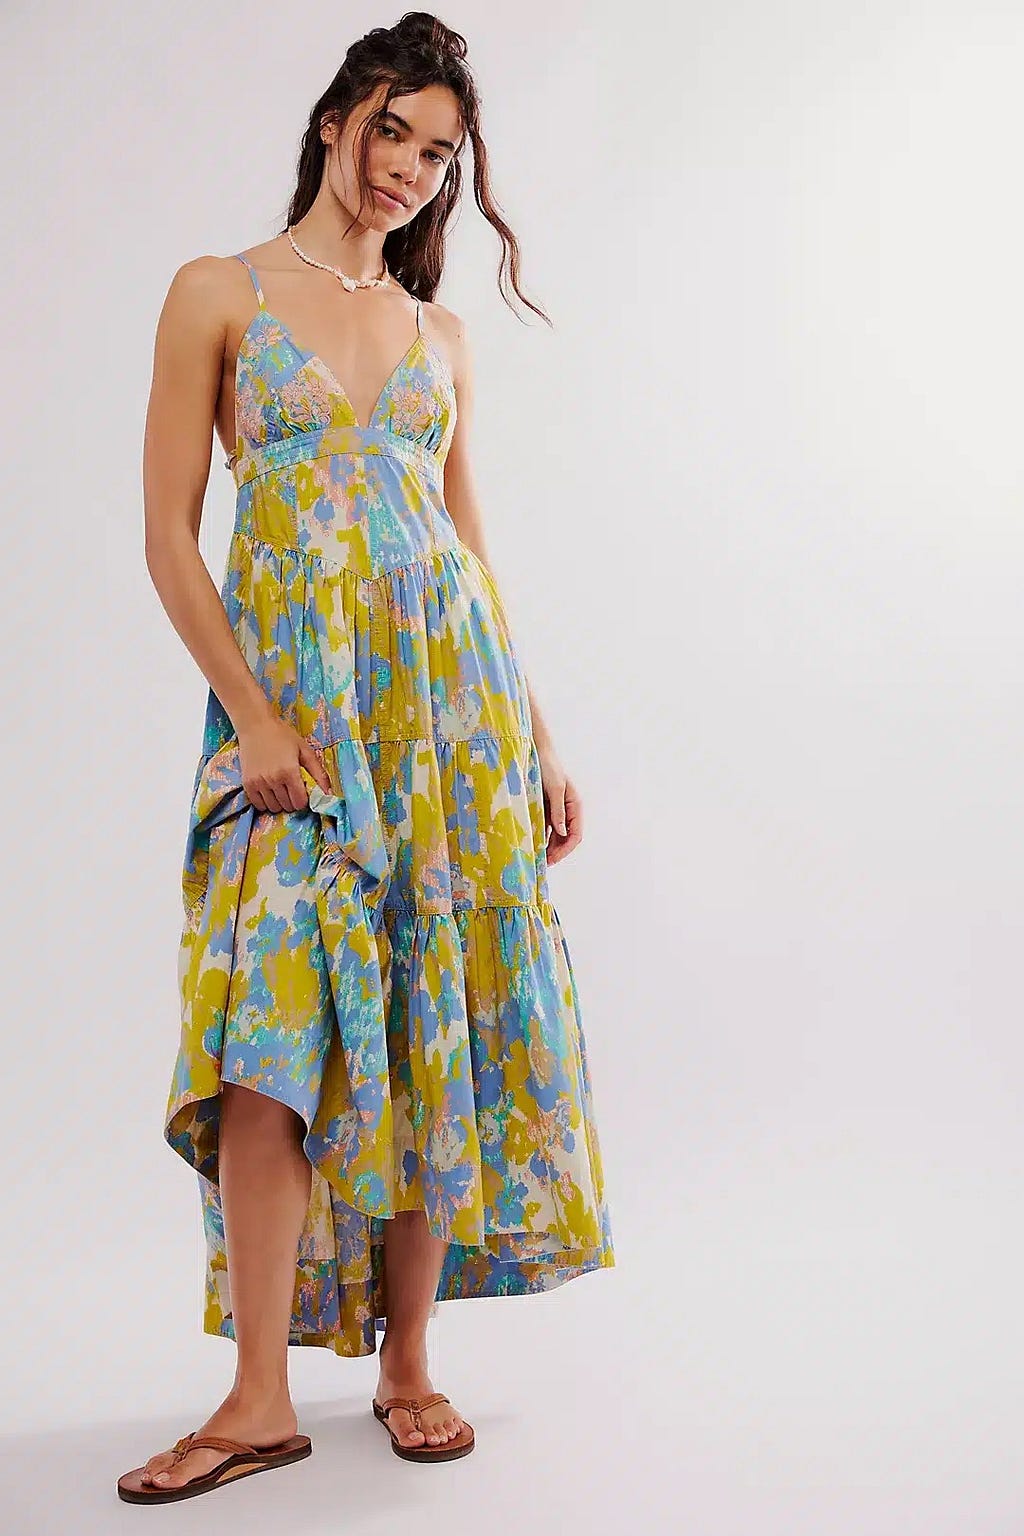 Model wearing a multi-colored, floral, maxi length sundress.